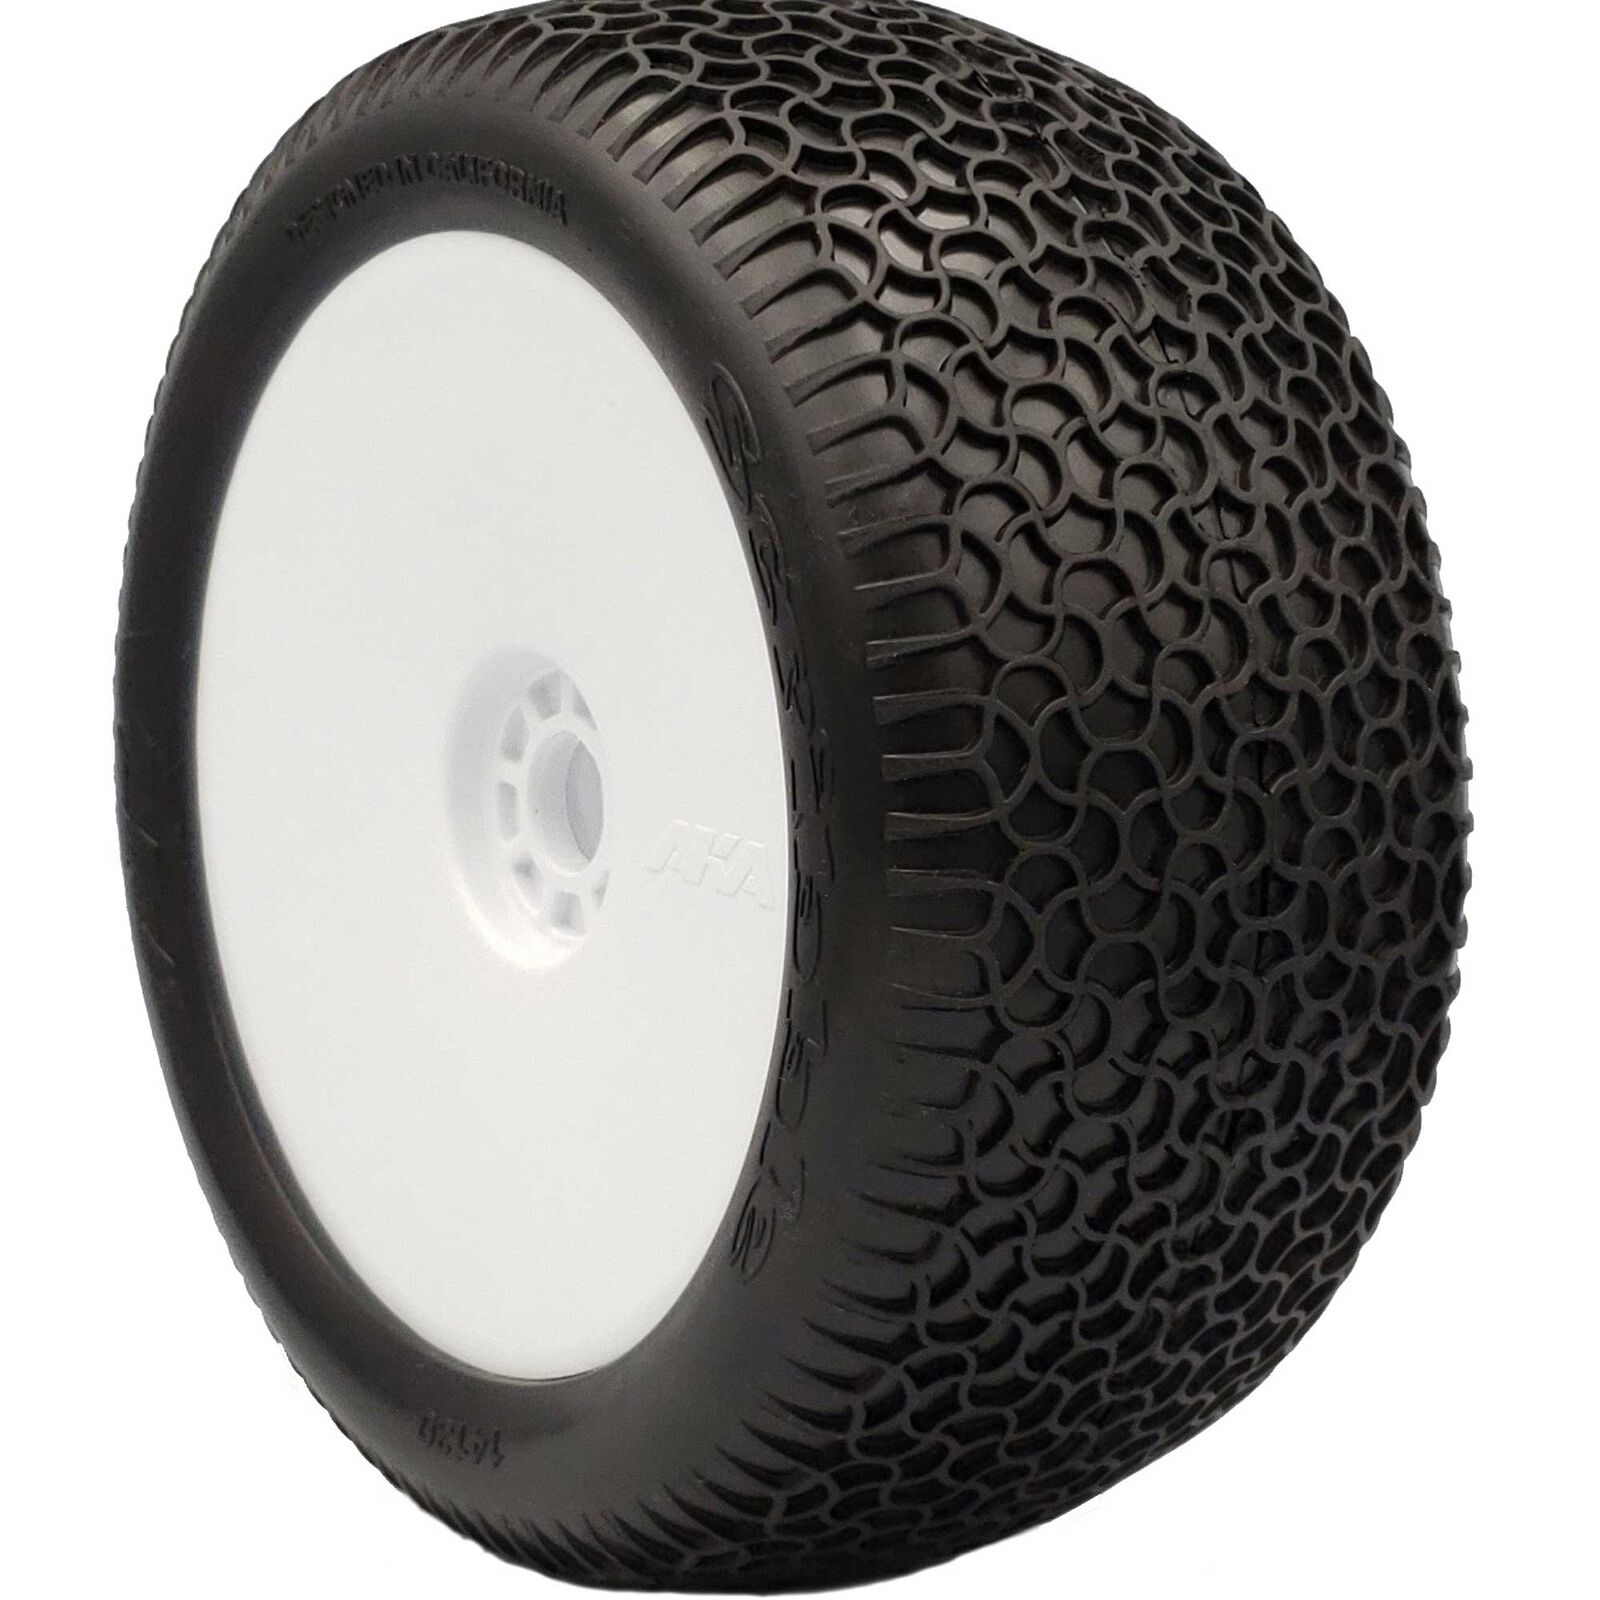 1/8 EVO Scribble Soft Long Wear Pre-Mounted Tires, White Wheels (2): Truggy